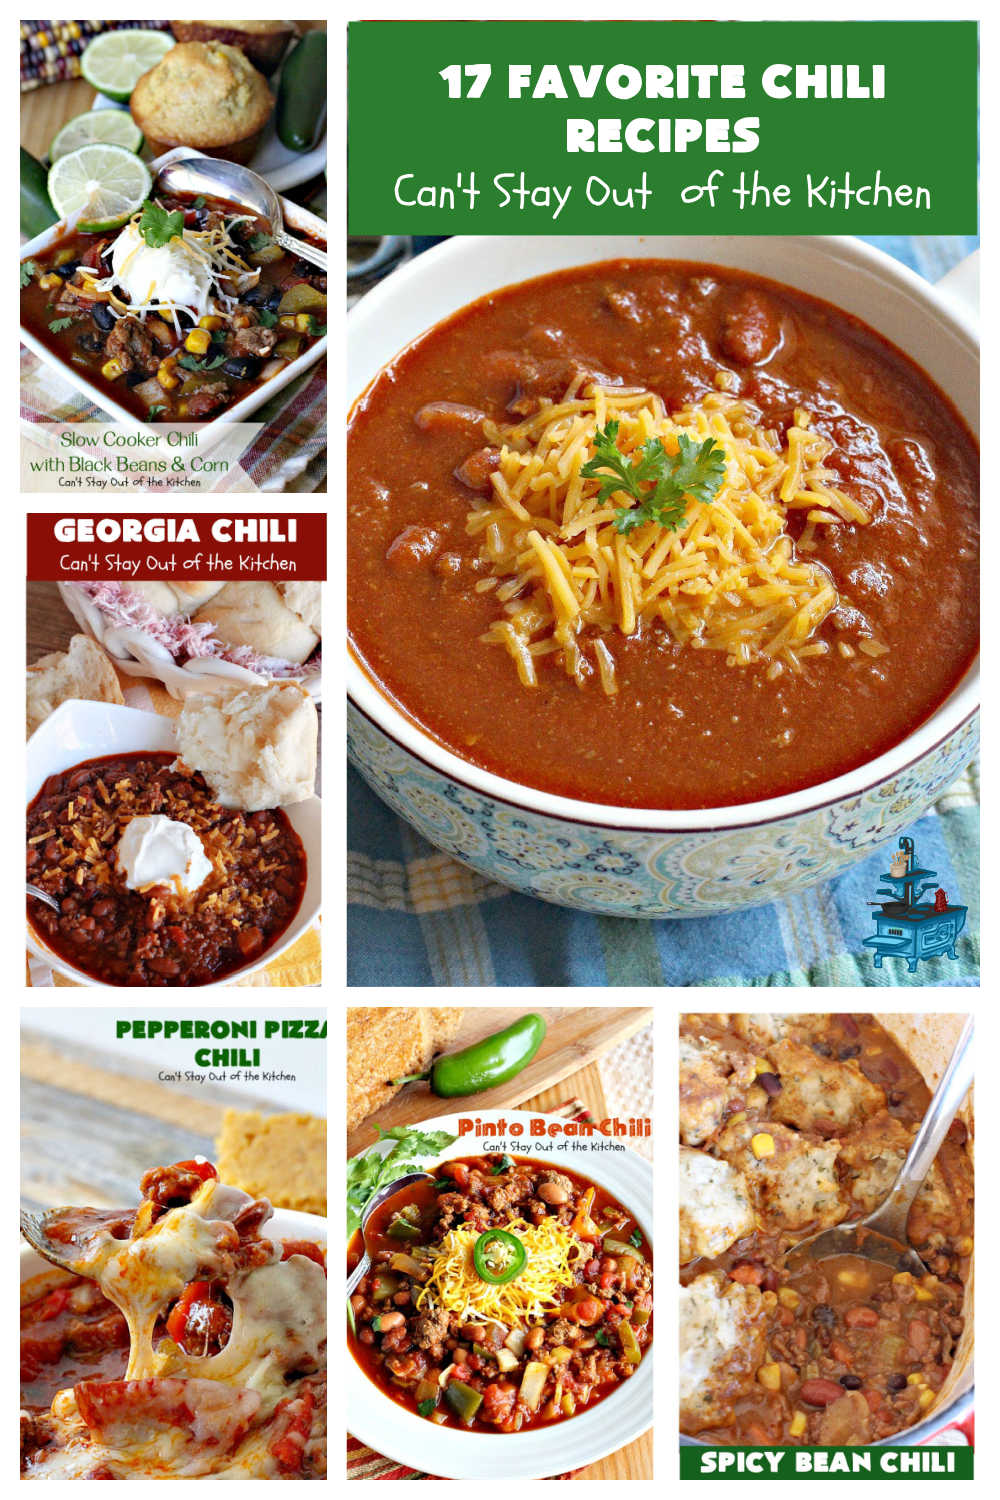 17 Favorite Chili Recipes | Can't Stay Out of the Kitchen | 17 delightful #chili #recipes to choose from including #beef, #chicken, #turkey or #vegan. Most are #GlutenFree. Enjoy your favorite #Fall comfort food with one of these great entrees. #ChiliRecipes #17FavoriteChiliRecipes